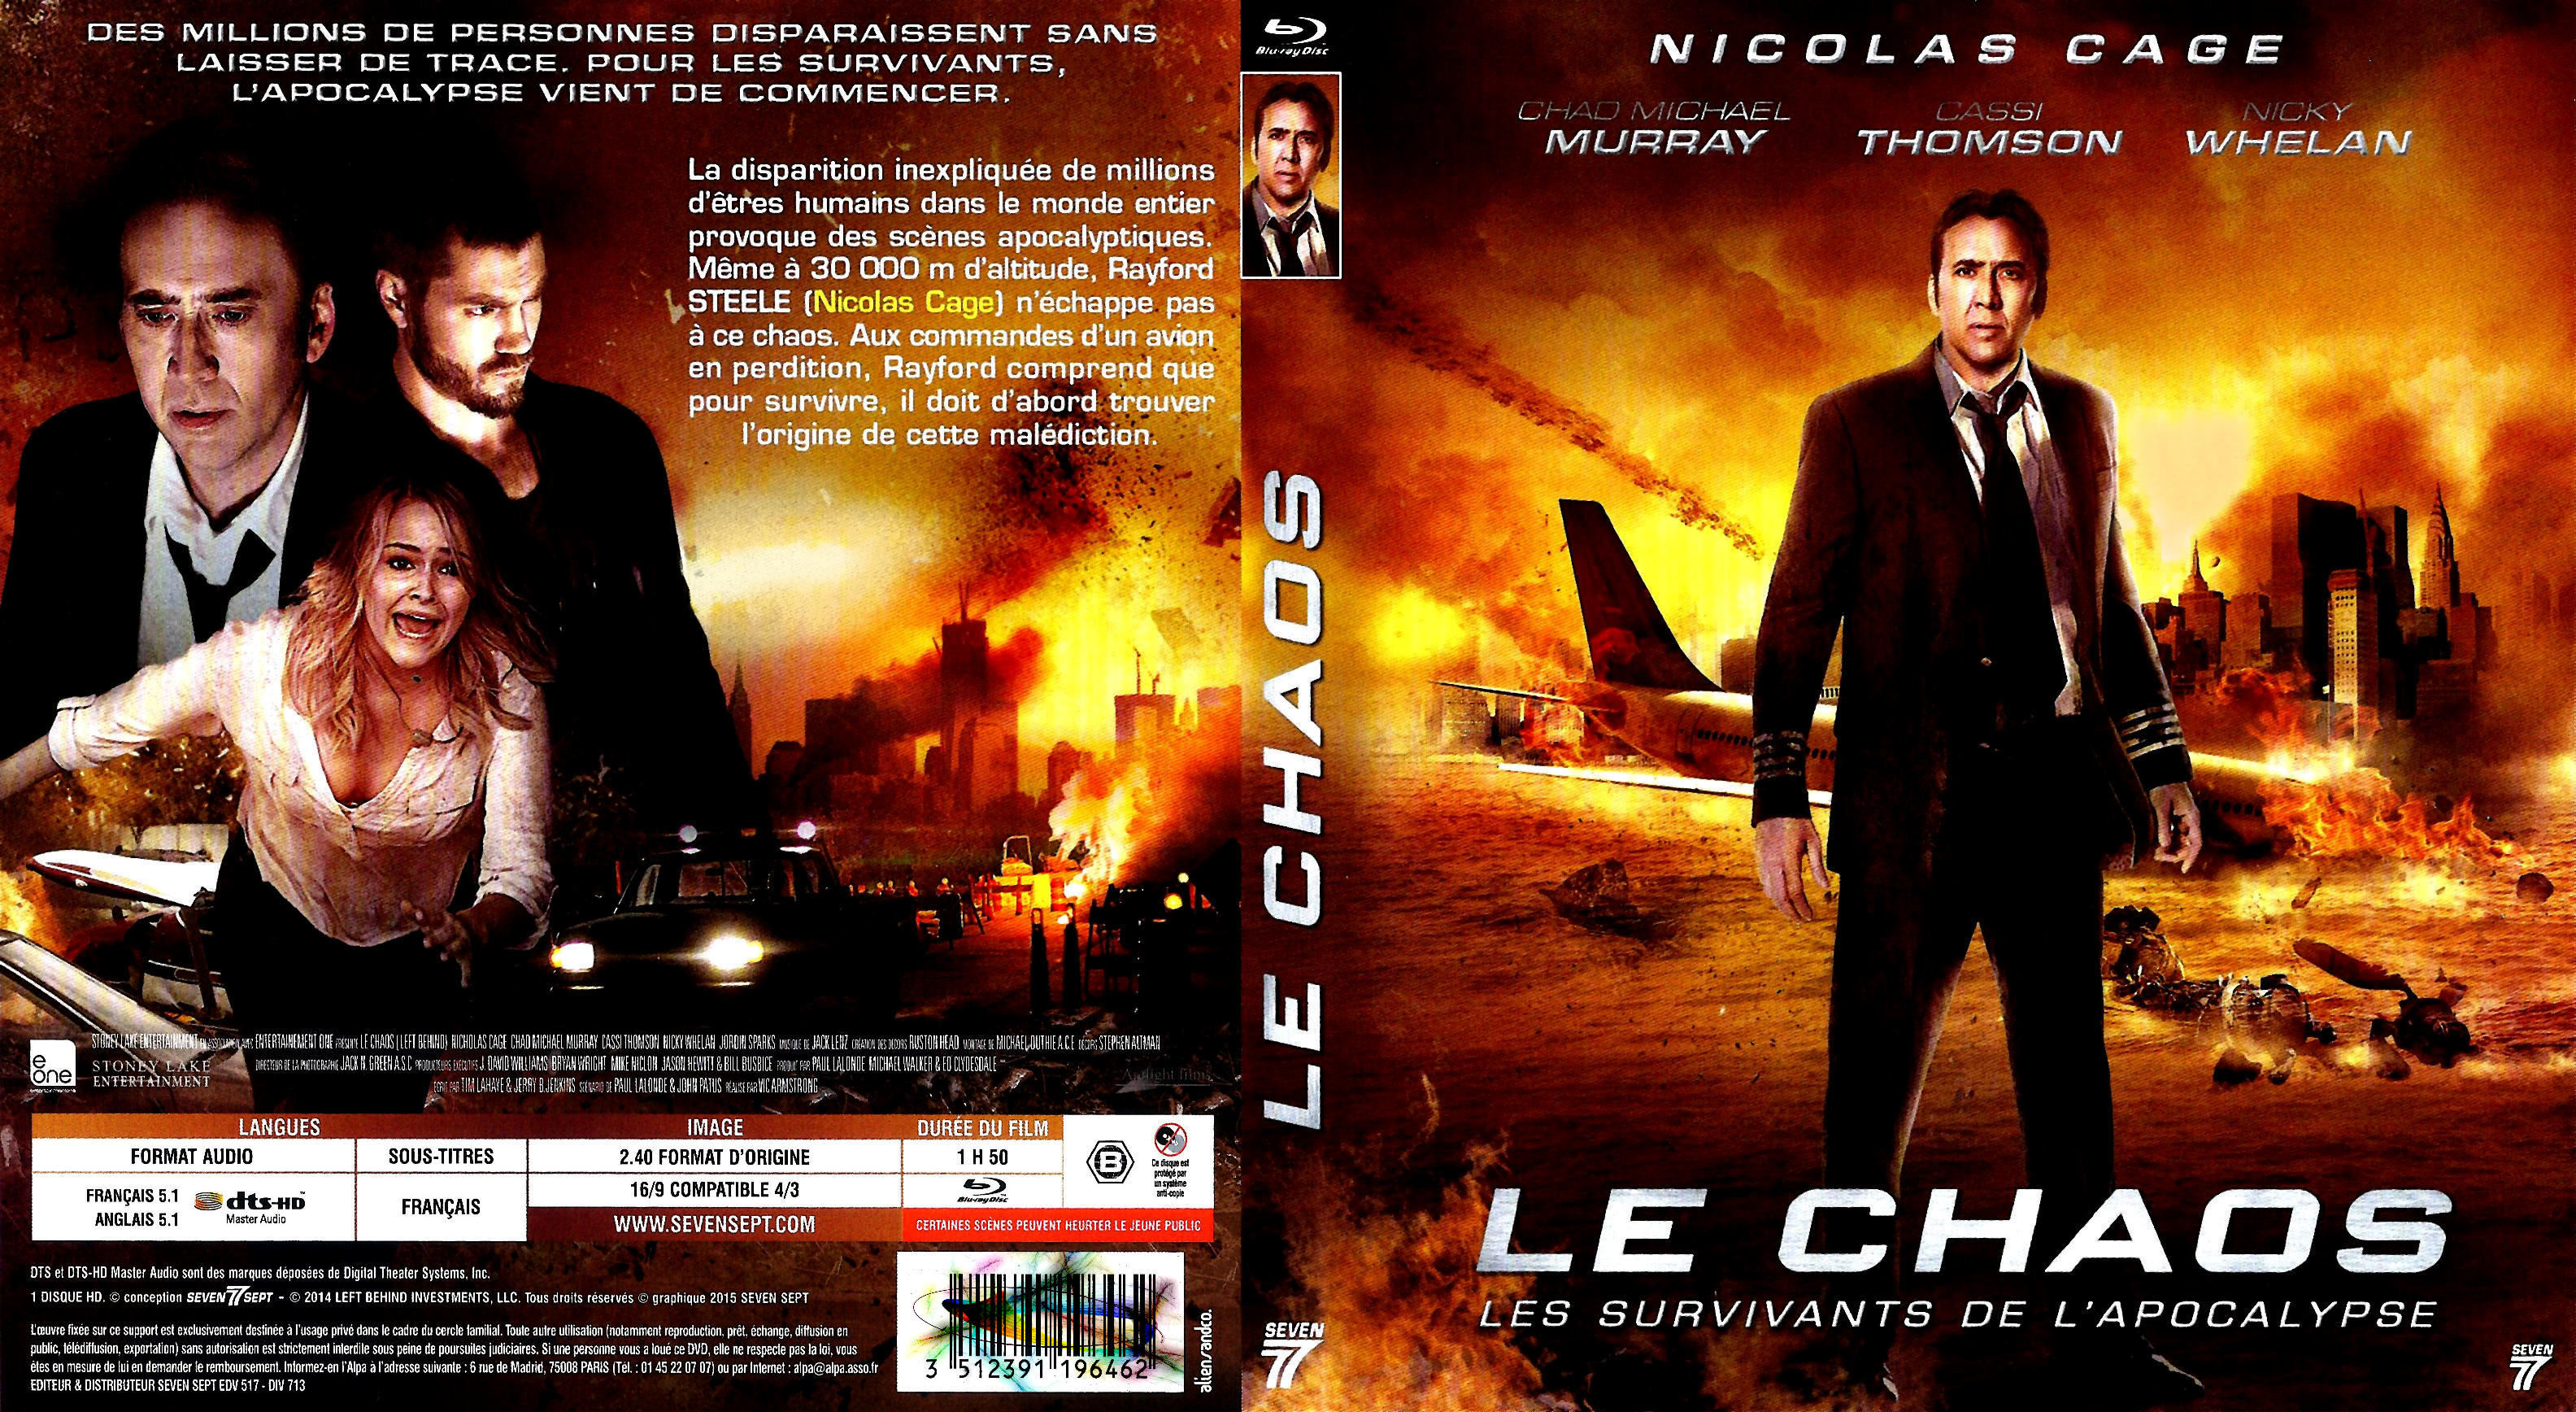 Jaquette DVD Le chaos (BLU-RAY)